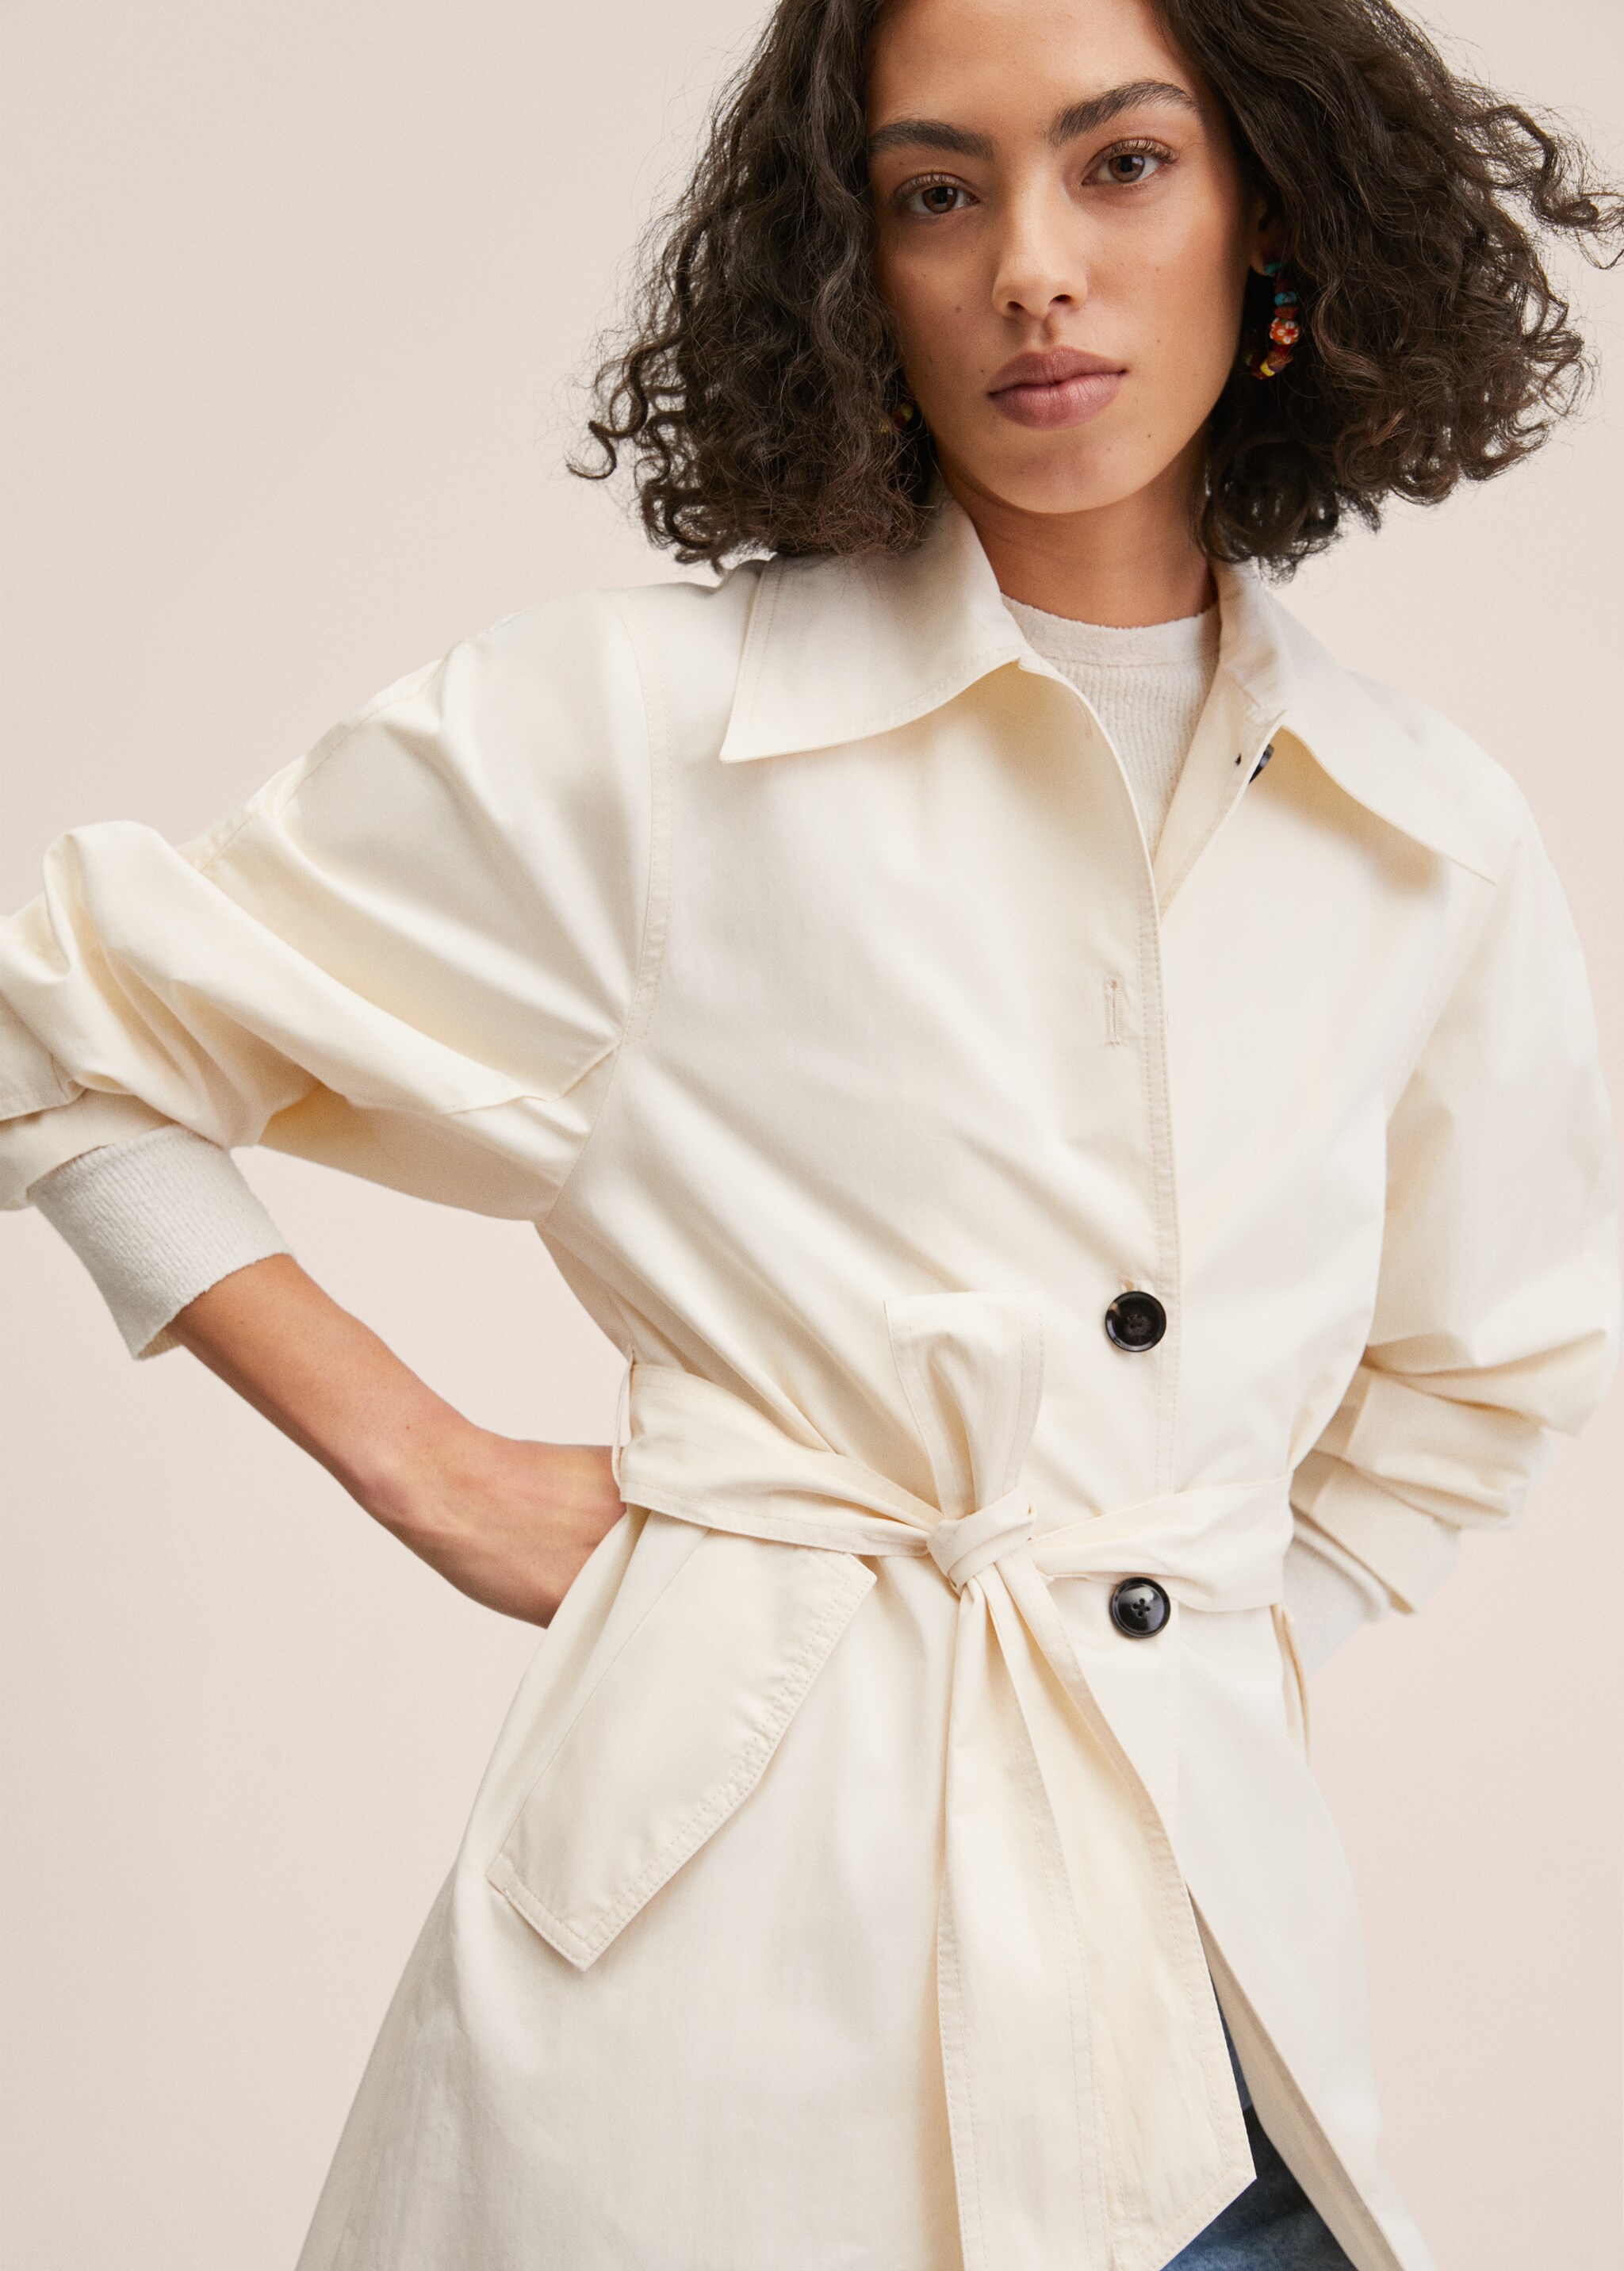 Balloon-sleeve trench coat - Details of the article 6